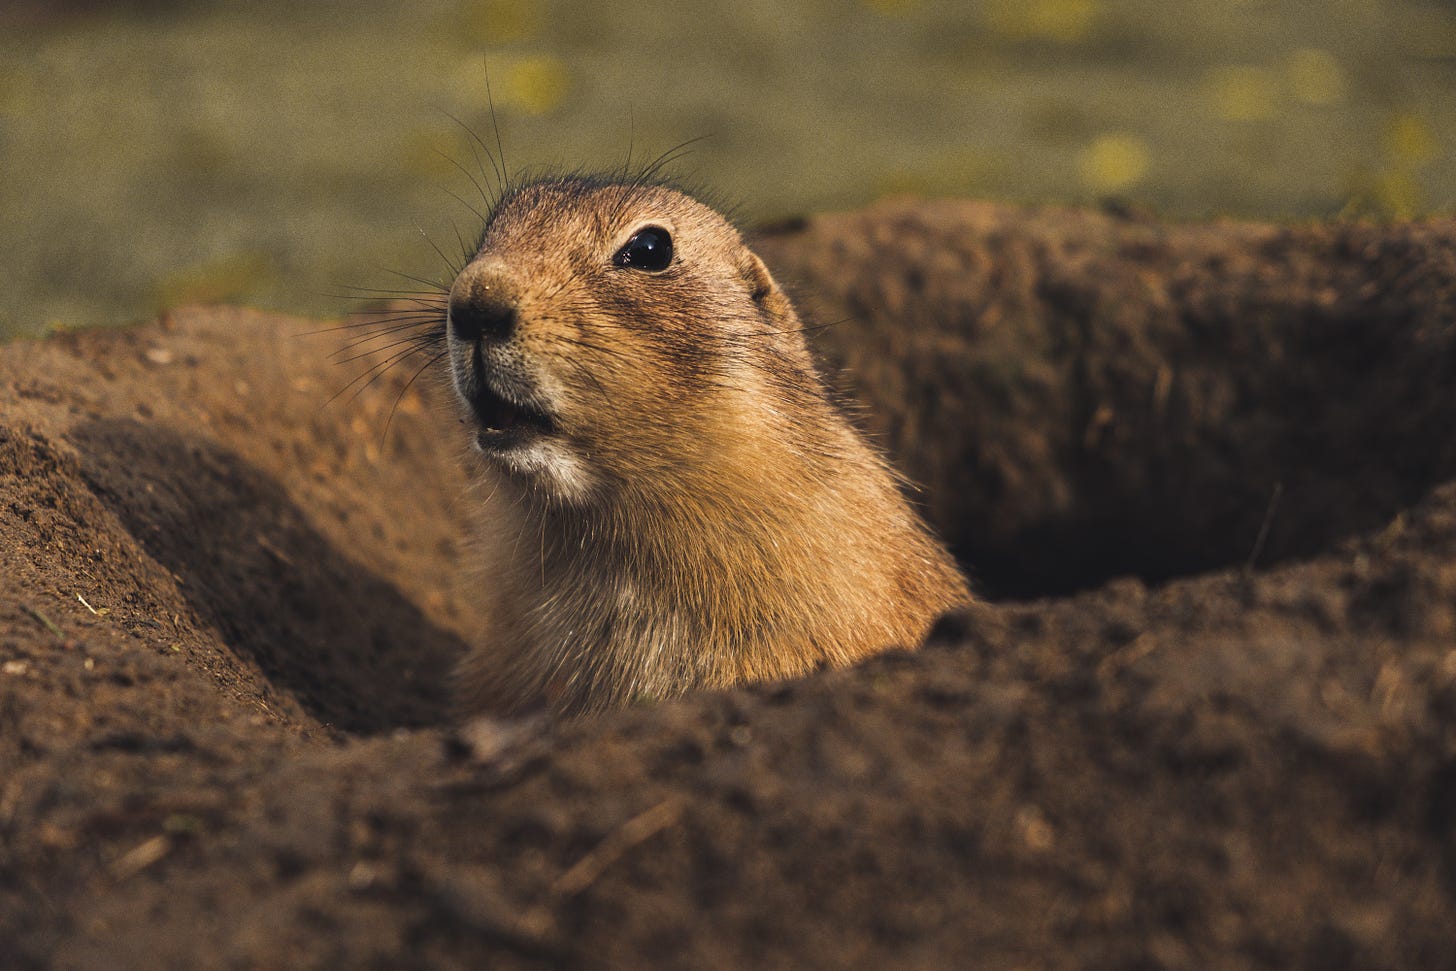 A prairie dog peeking out of a burrow in the ground looking at the camera with its mouth slightly open as if about to say something